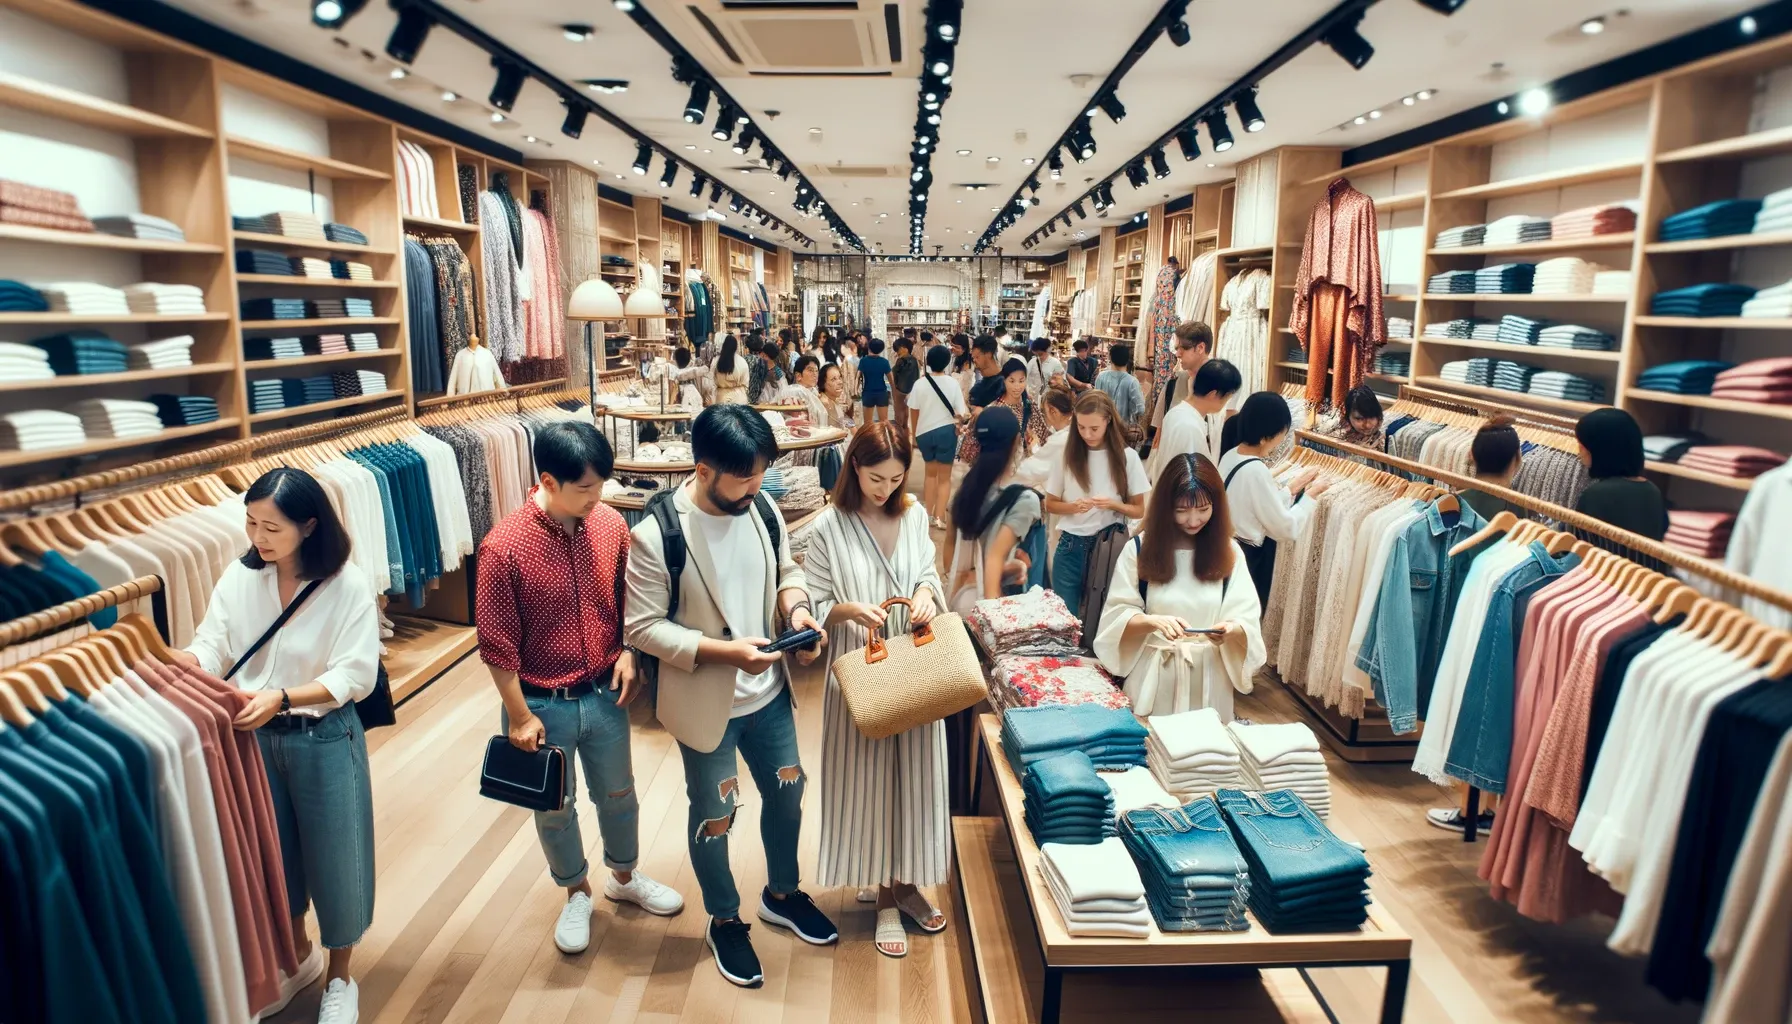 Photo of a lively clothing store with international tourists browsing through the aisles and store clerks assisting them&#44; emphasizing a multicultural shopping environment.